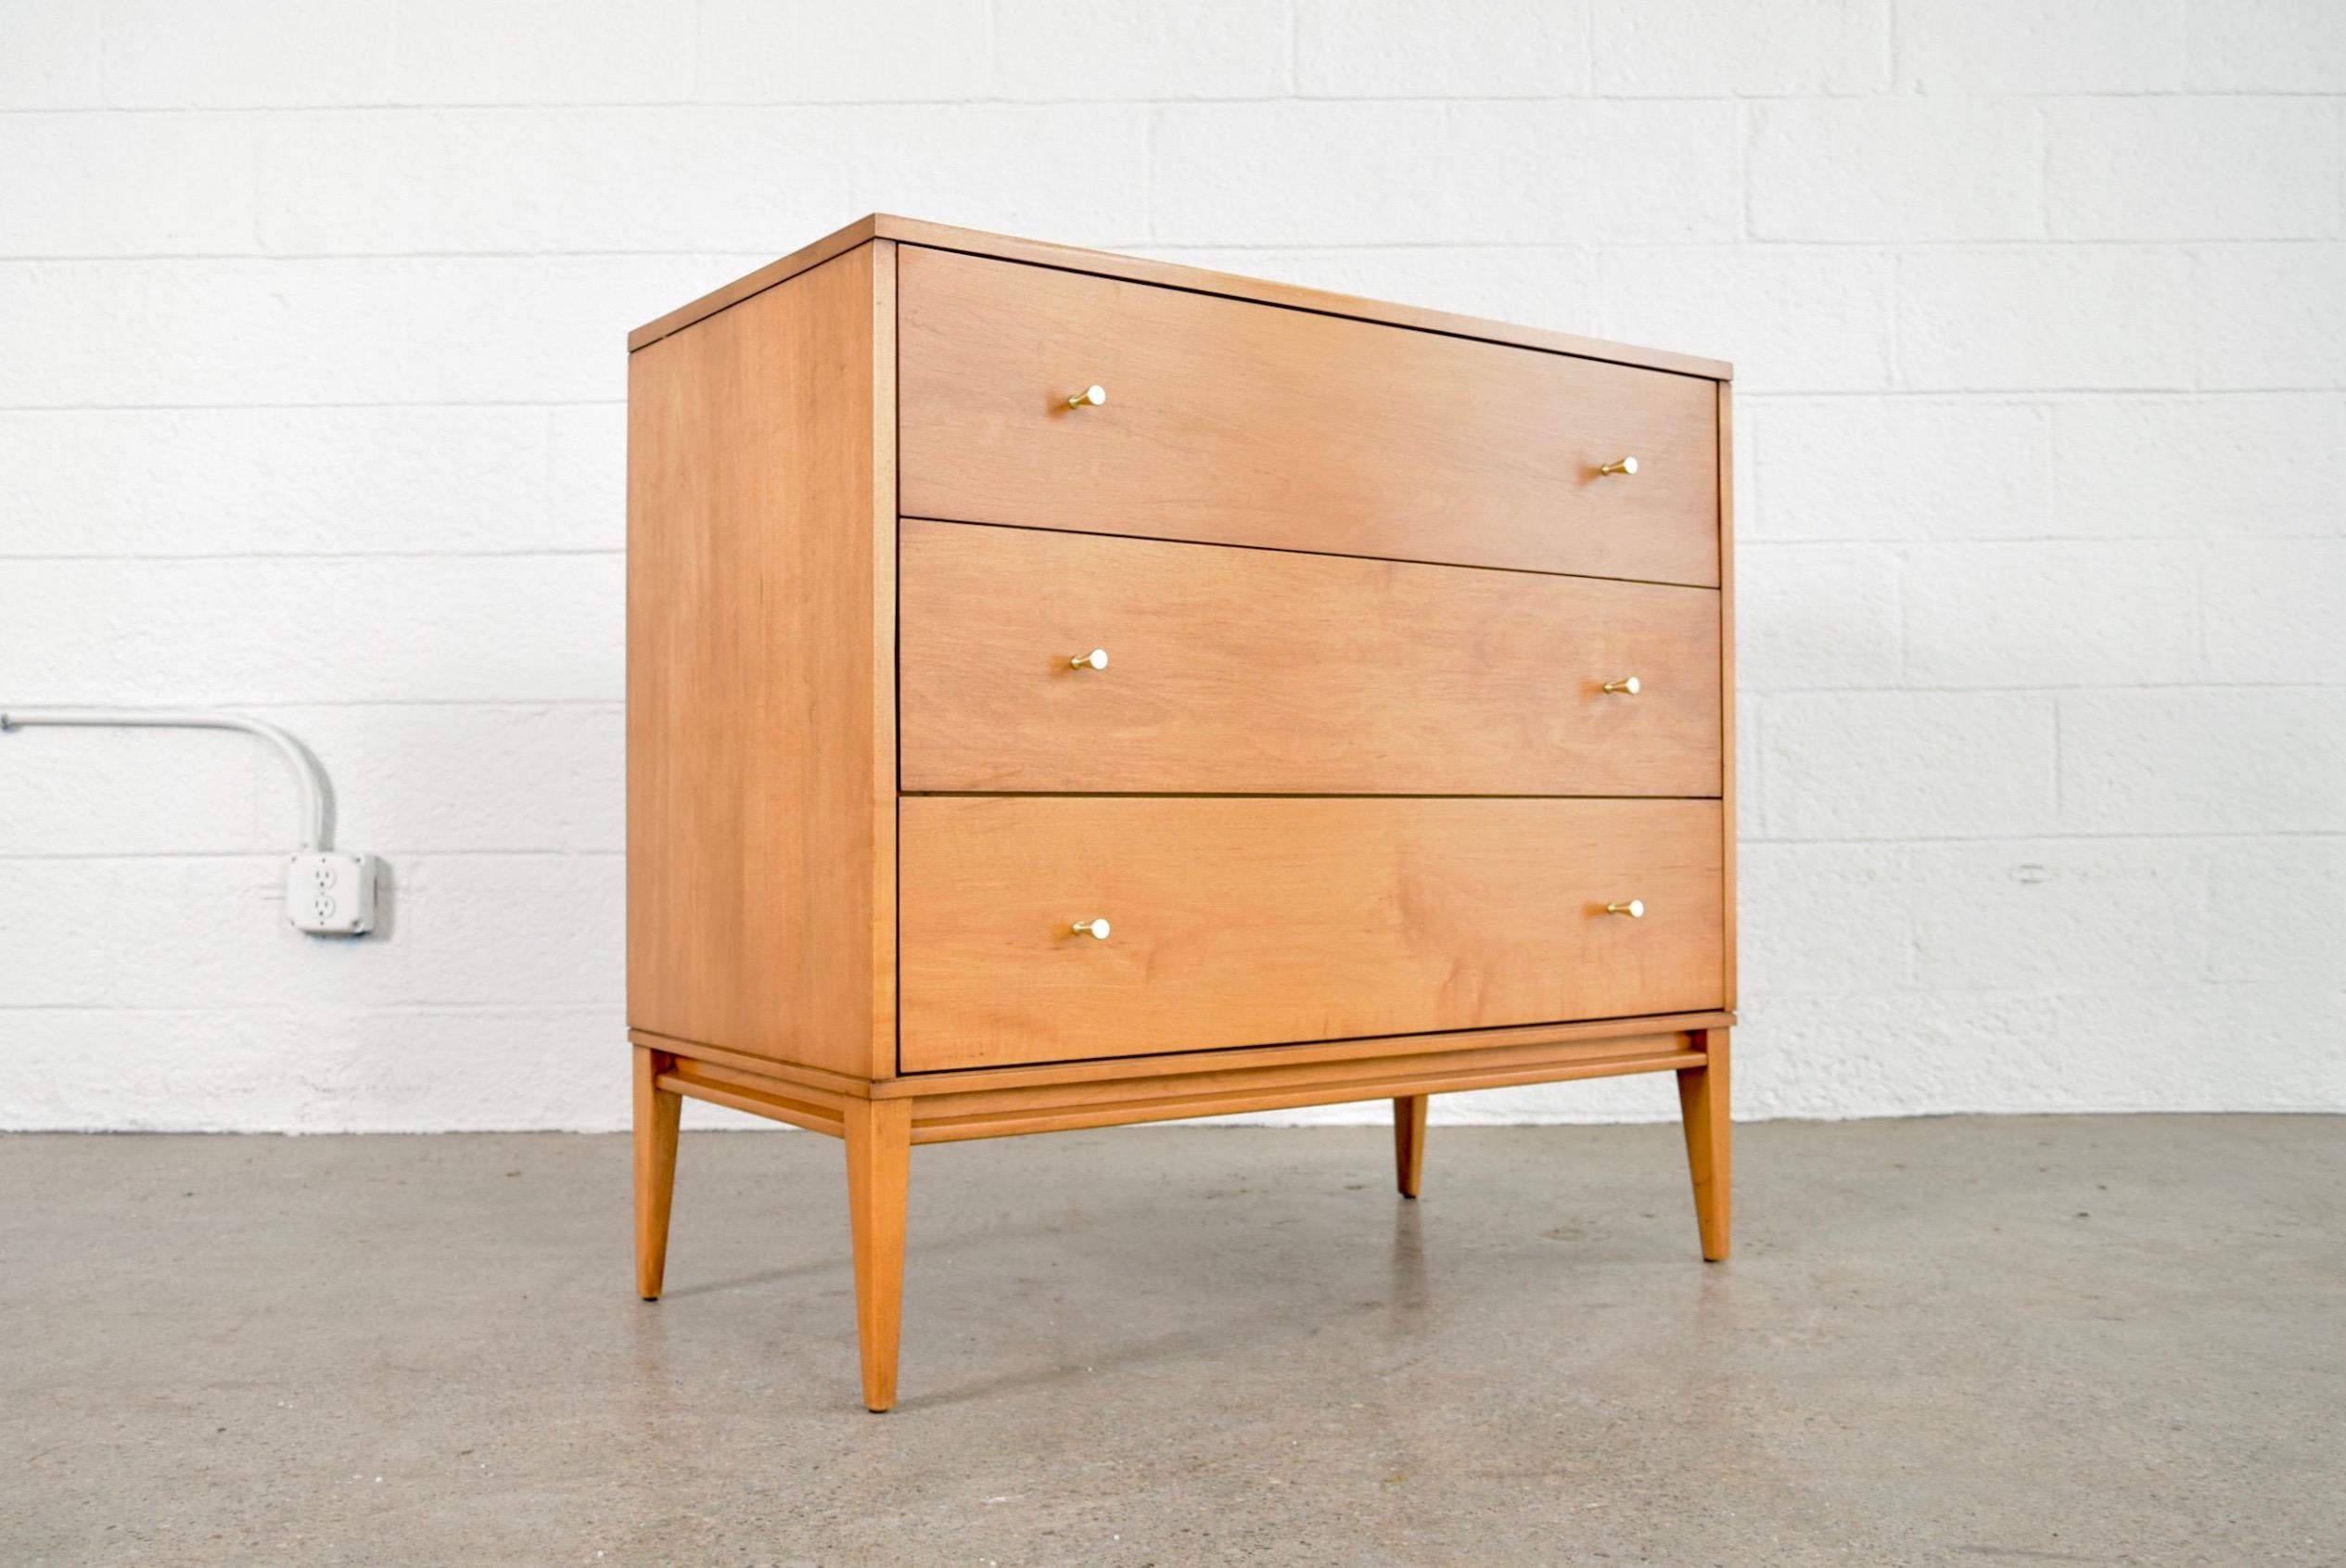 • Exceptional vintage Mid-Century Modern Paul McCobb Planner Group three-drawer dresser chest for Winchendon, circa 1950.
• Simple, elegant Mid-Century Modern styling with clean geometric lines.
• Well crafted from solid wood with signature